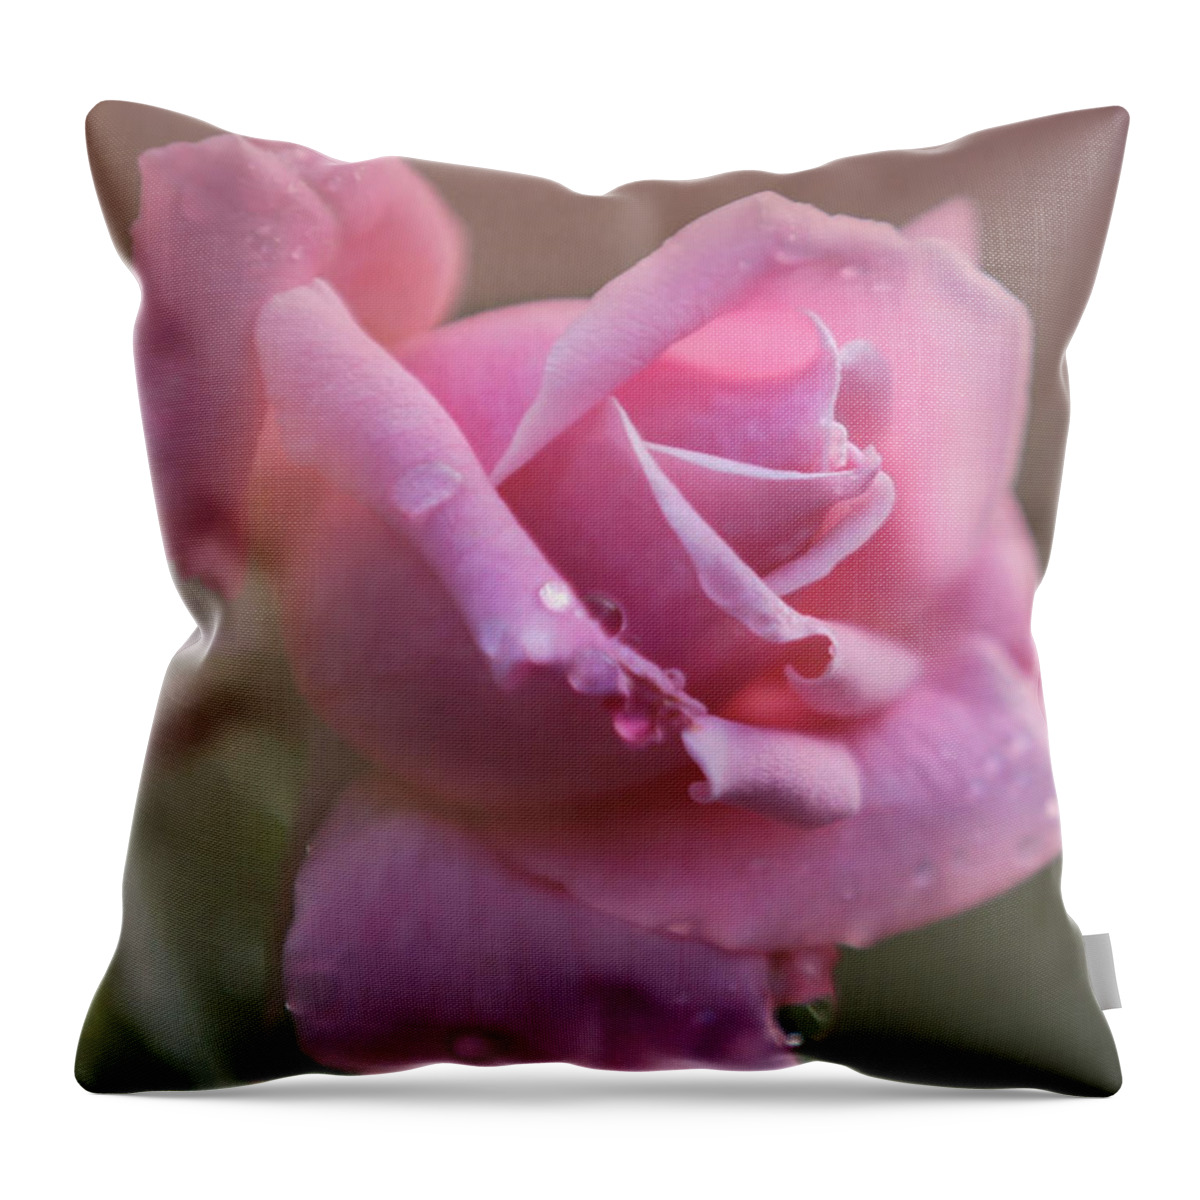 Amazing Throw Pillow featuring the photograph So Sweet by Sabrina L Ryan